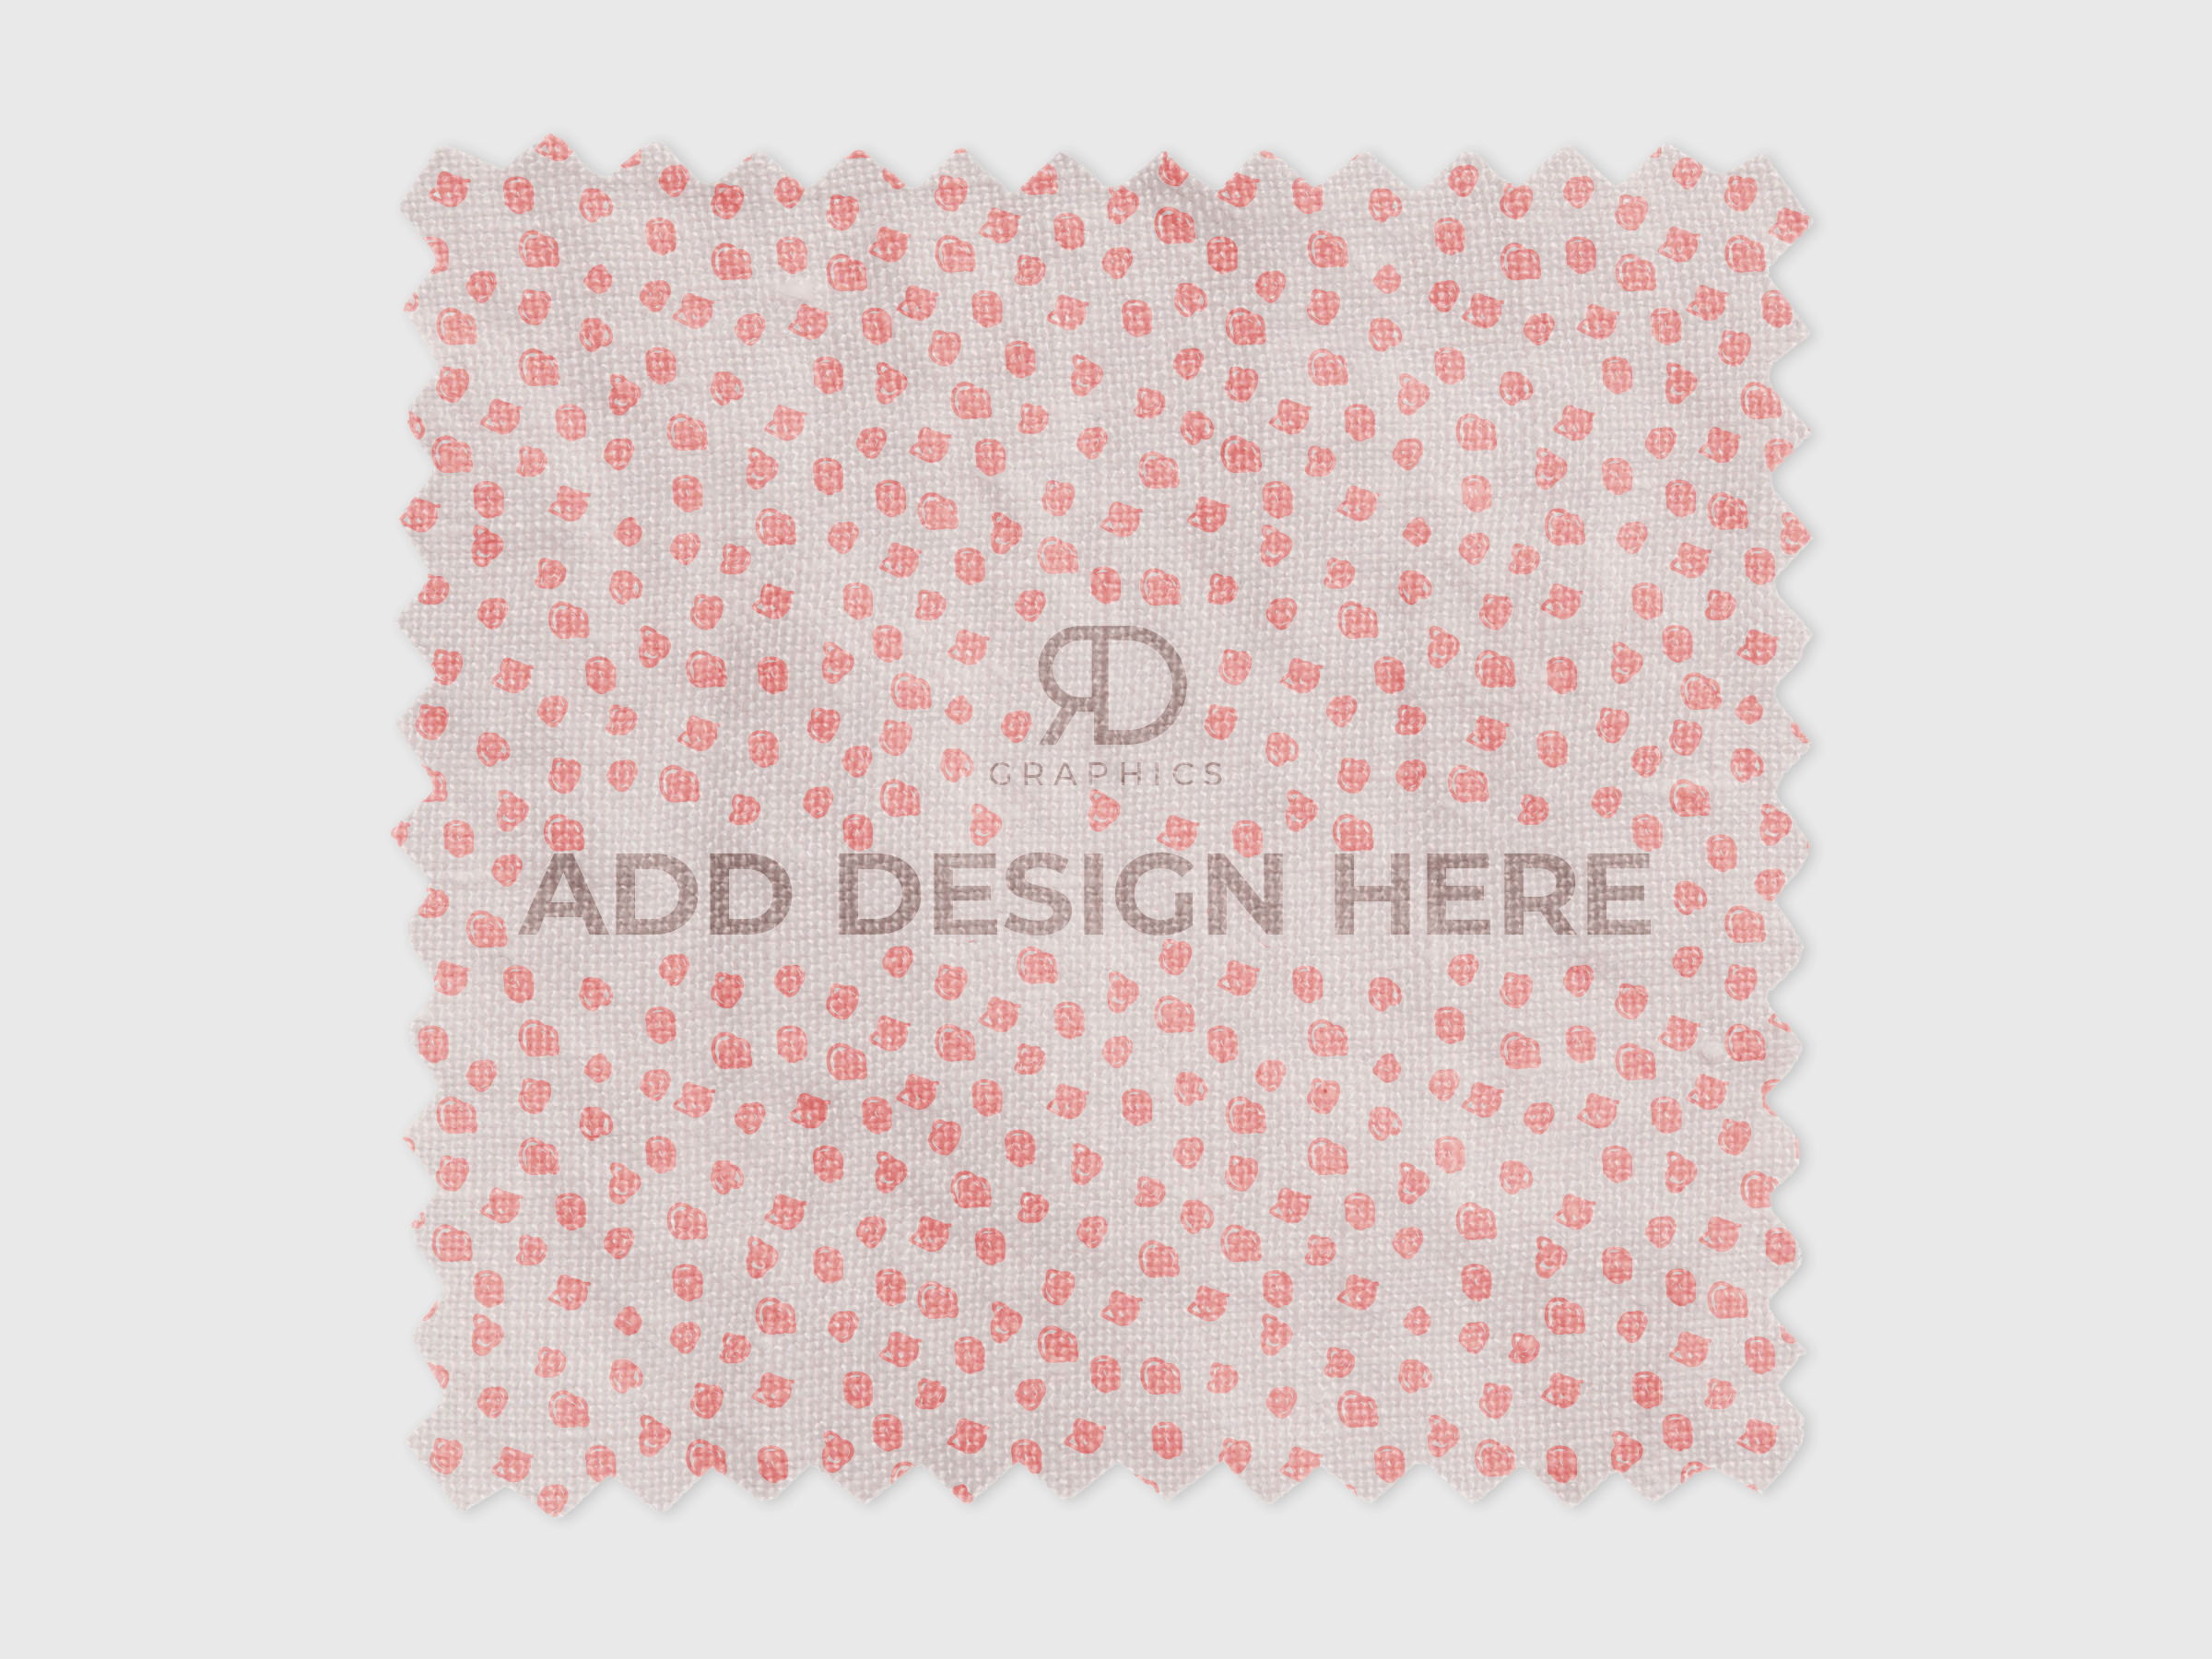 Download Free Fabric Swatch Mock Up 5 Hand Drawn Doodle Patterns Free Mockup Download